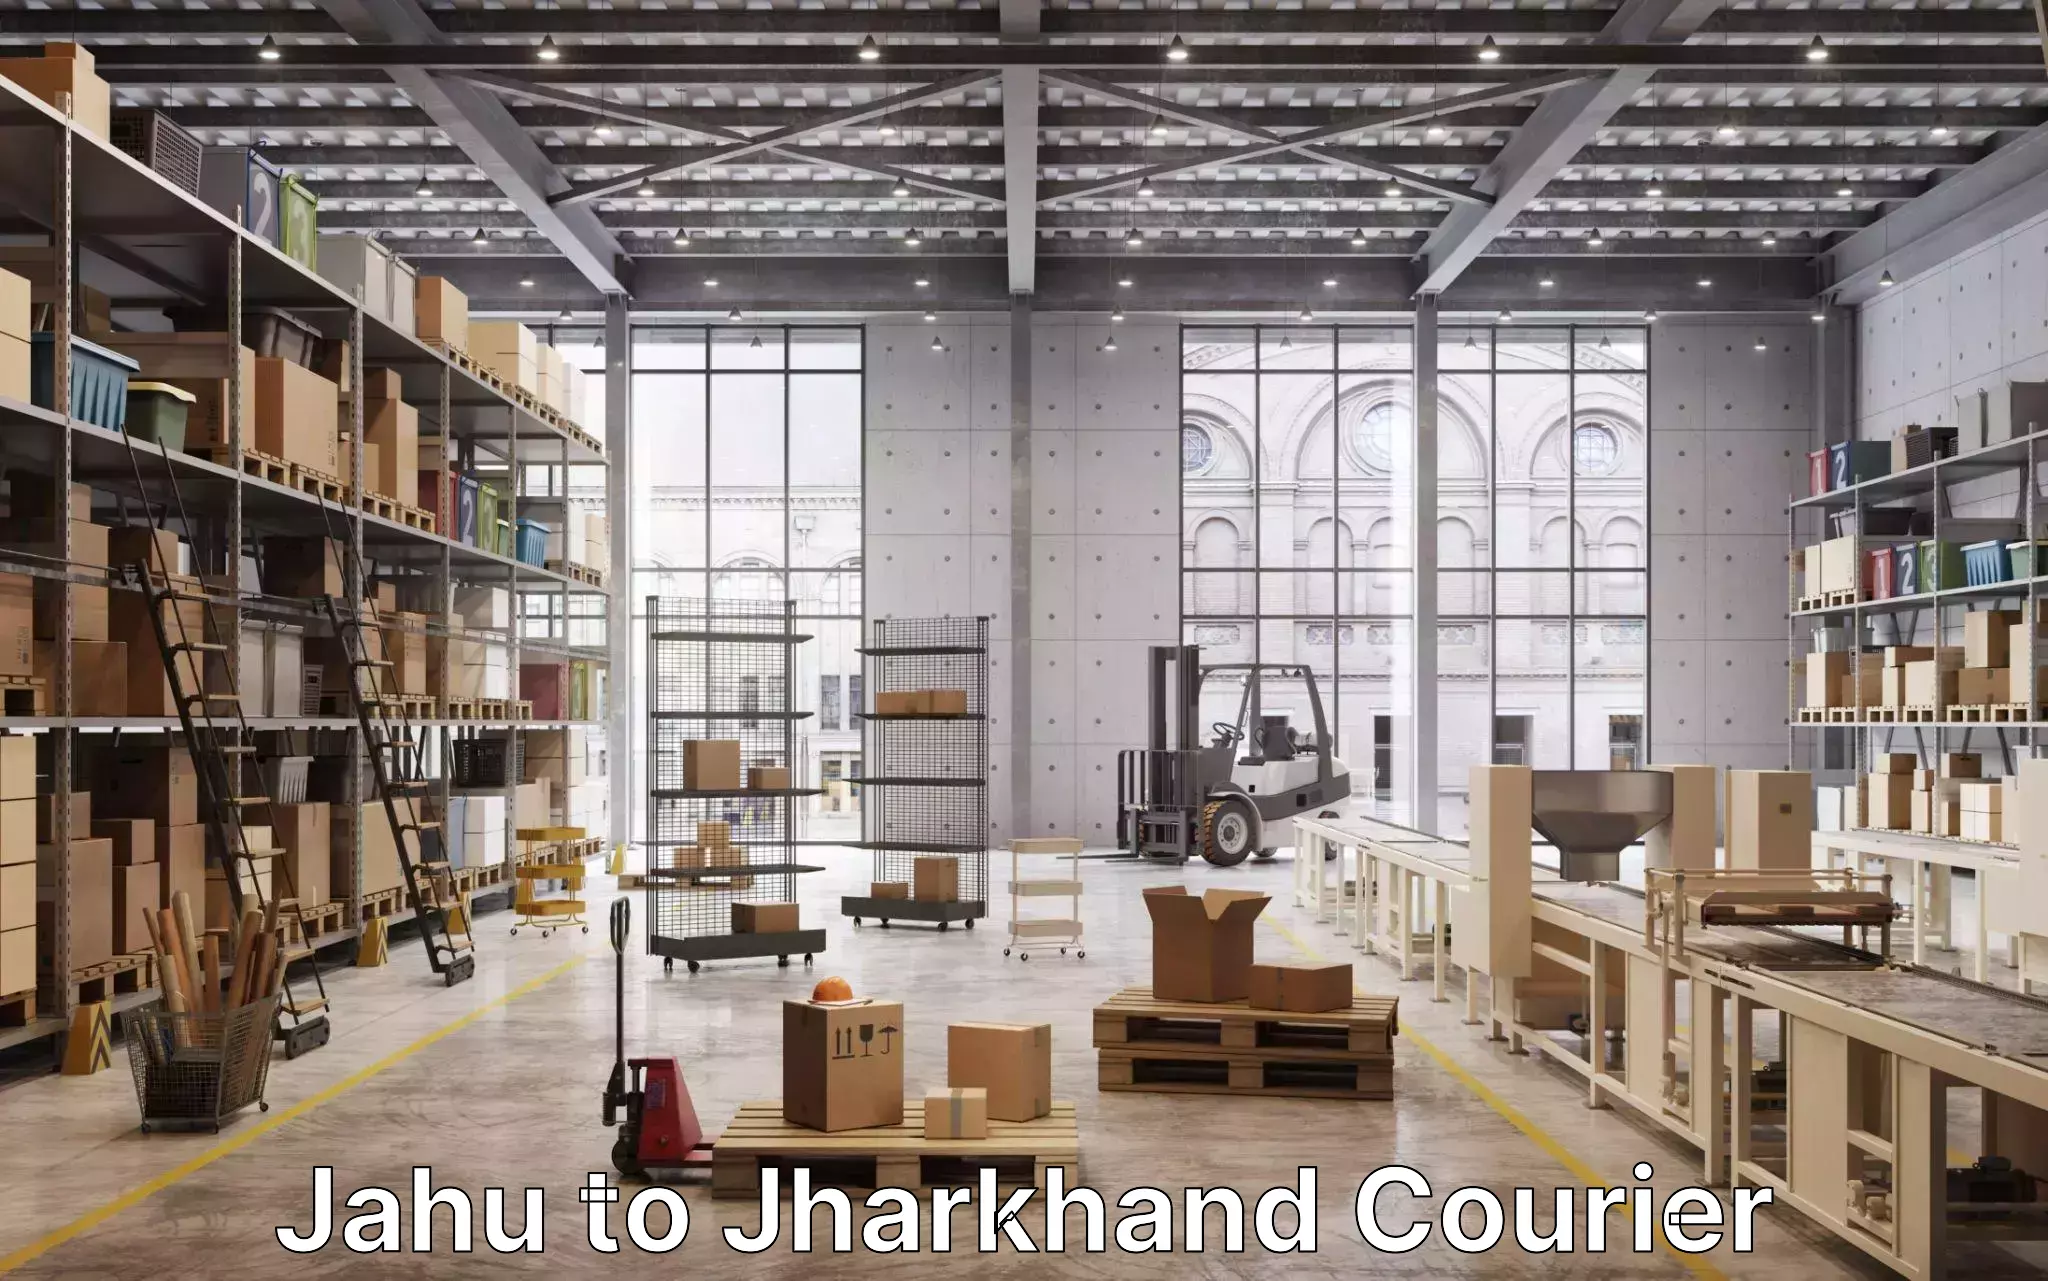 Furniture delivery service Jahu to Jharkhand